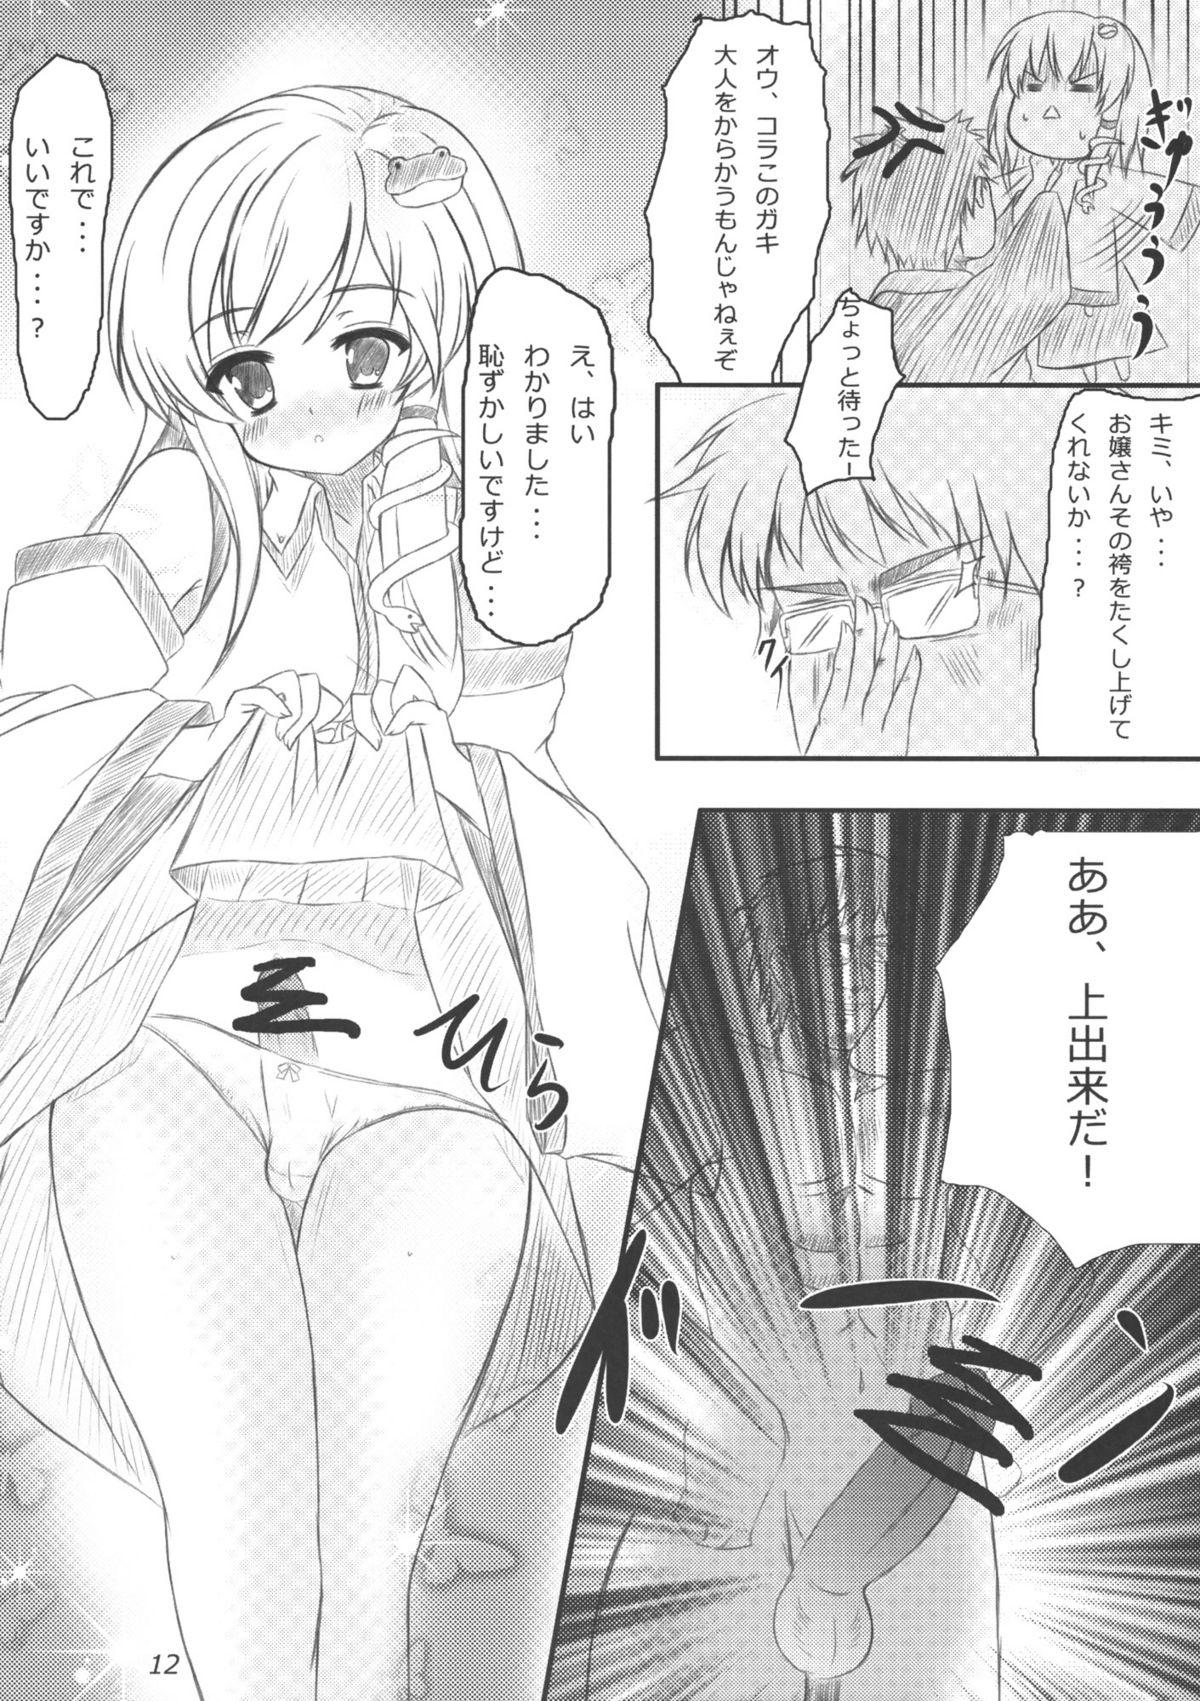 Doggy Style 早苗さんになってみた結果がこれだよ！？ - Touhou project Femdom Porn - Page 11